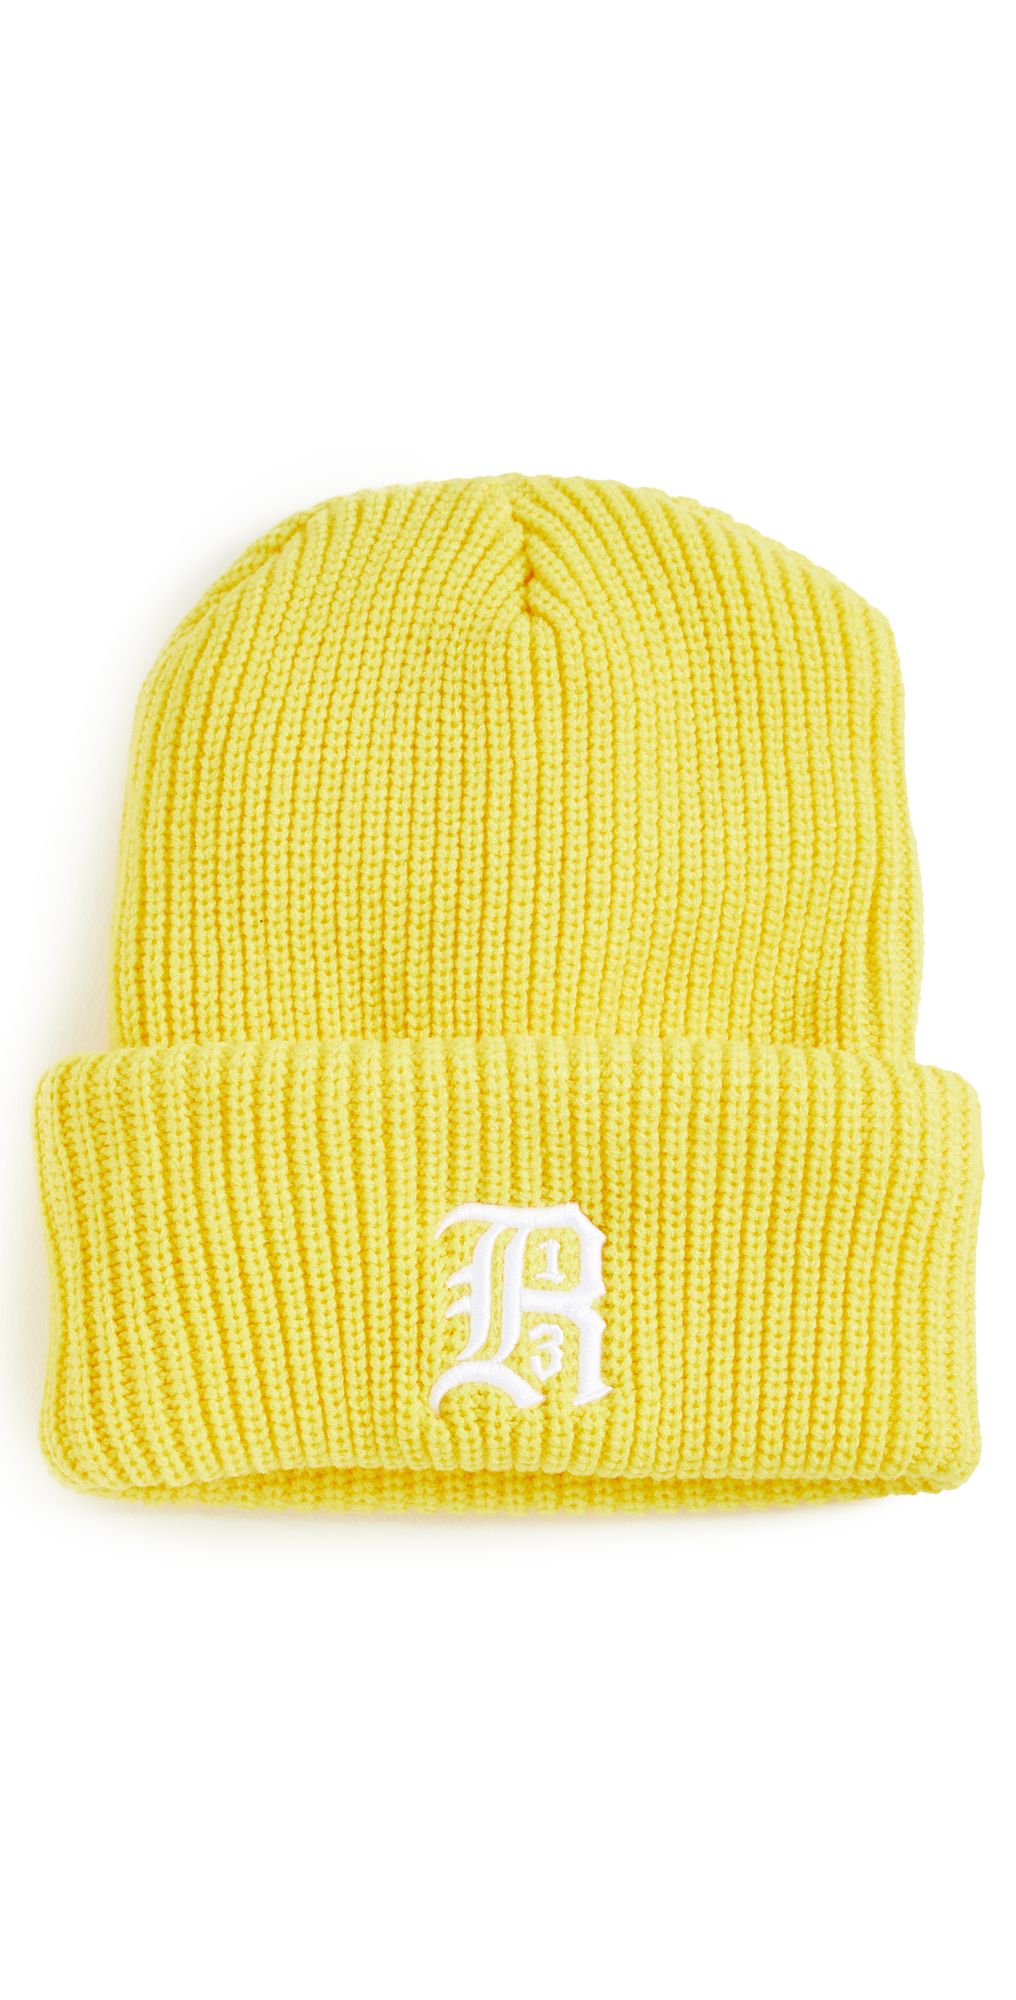 R13 Beanie with Embroidery | SHOPBOP | Shopbop